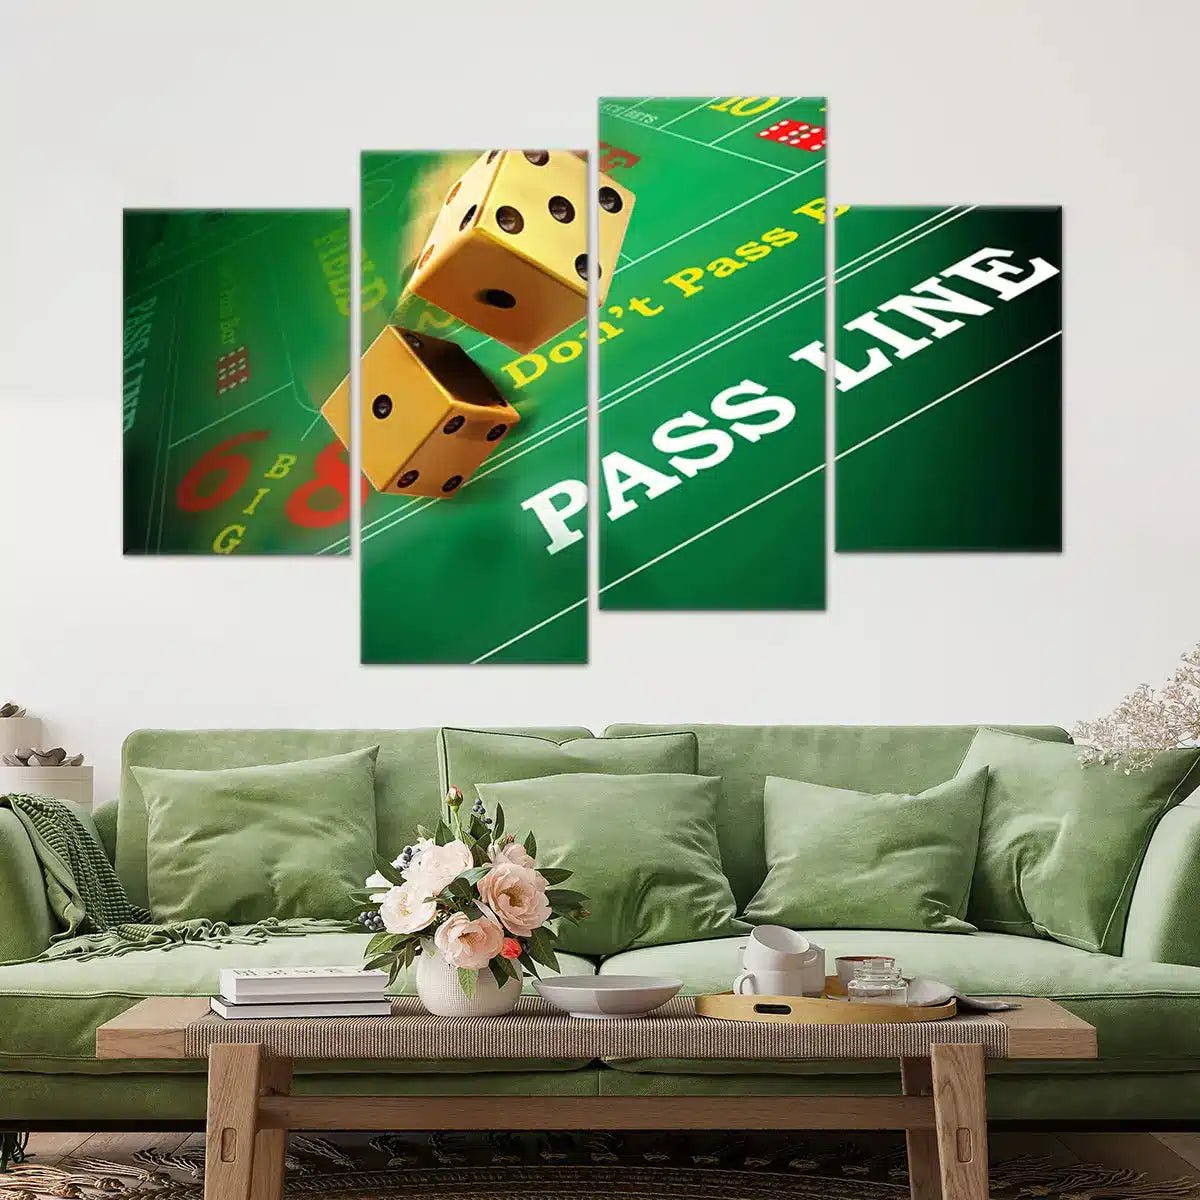 This Is How I Roll Dice Funny Game Bet Casino Wall Decals for Walls Peel  and Stick wall art murals Black Large 36 Inch 